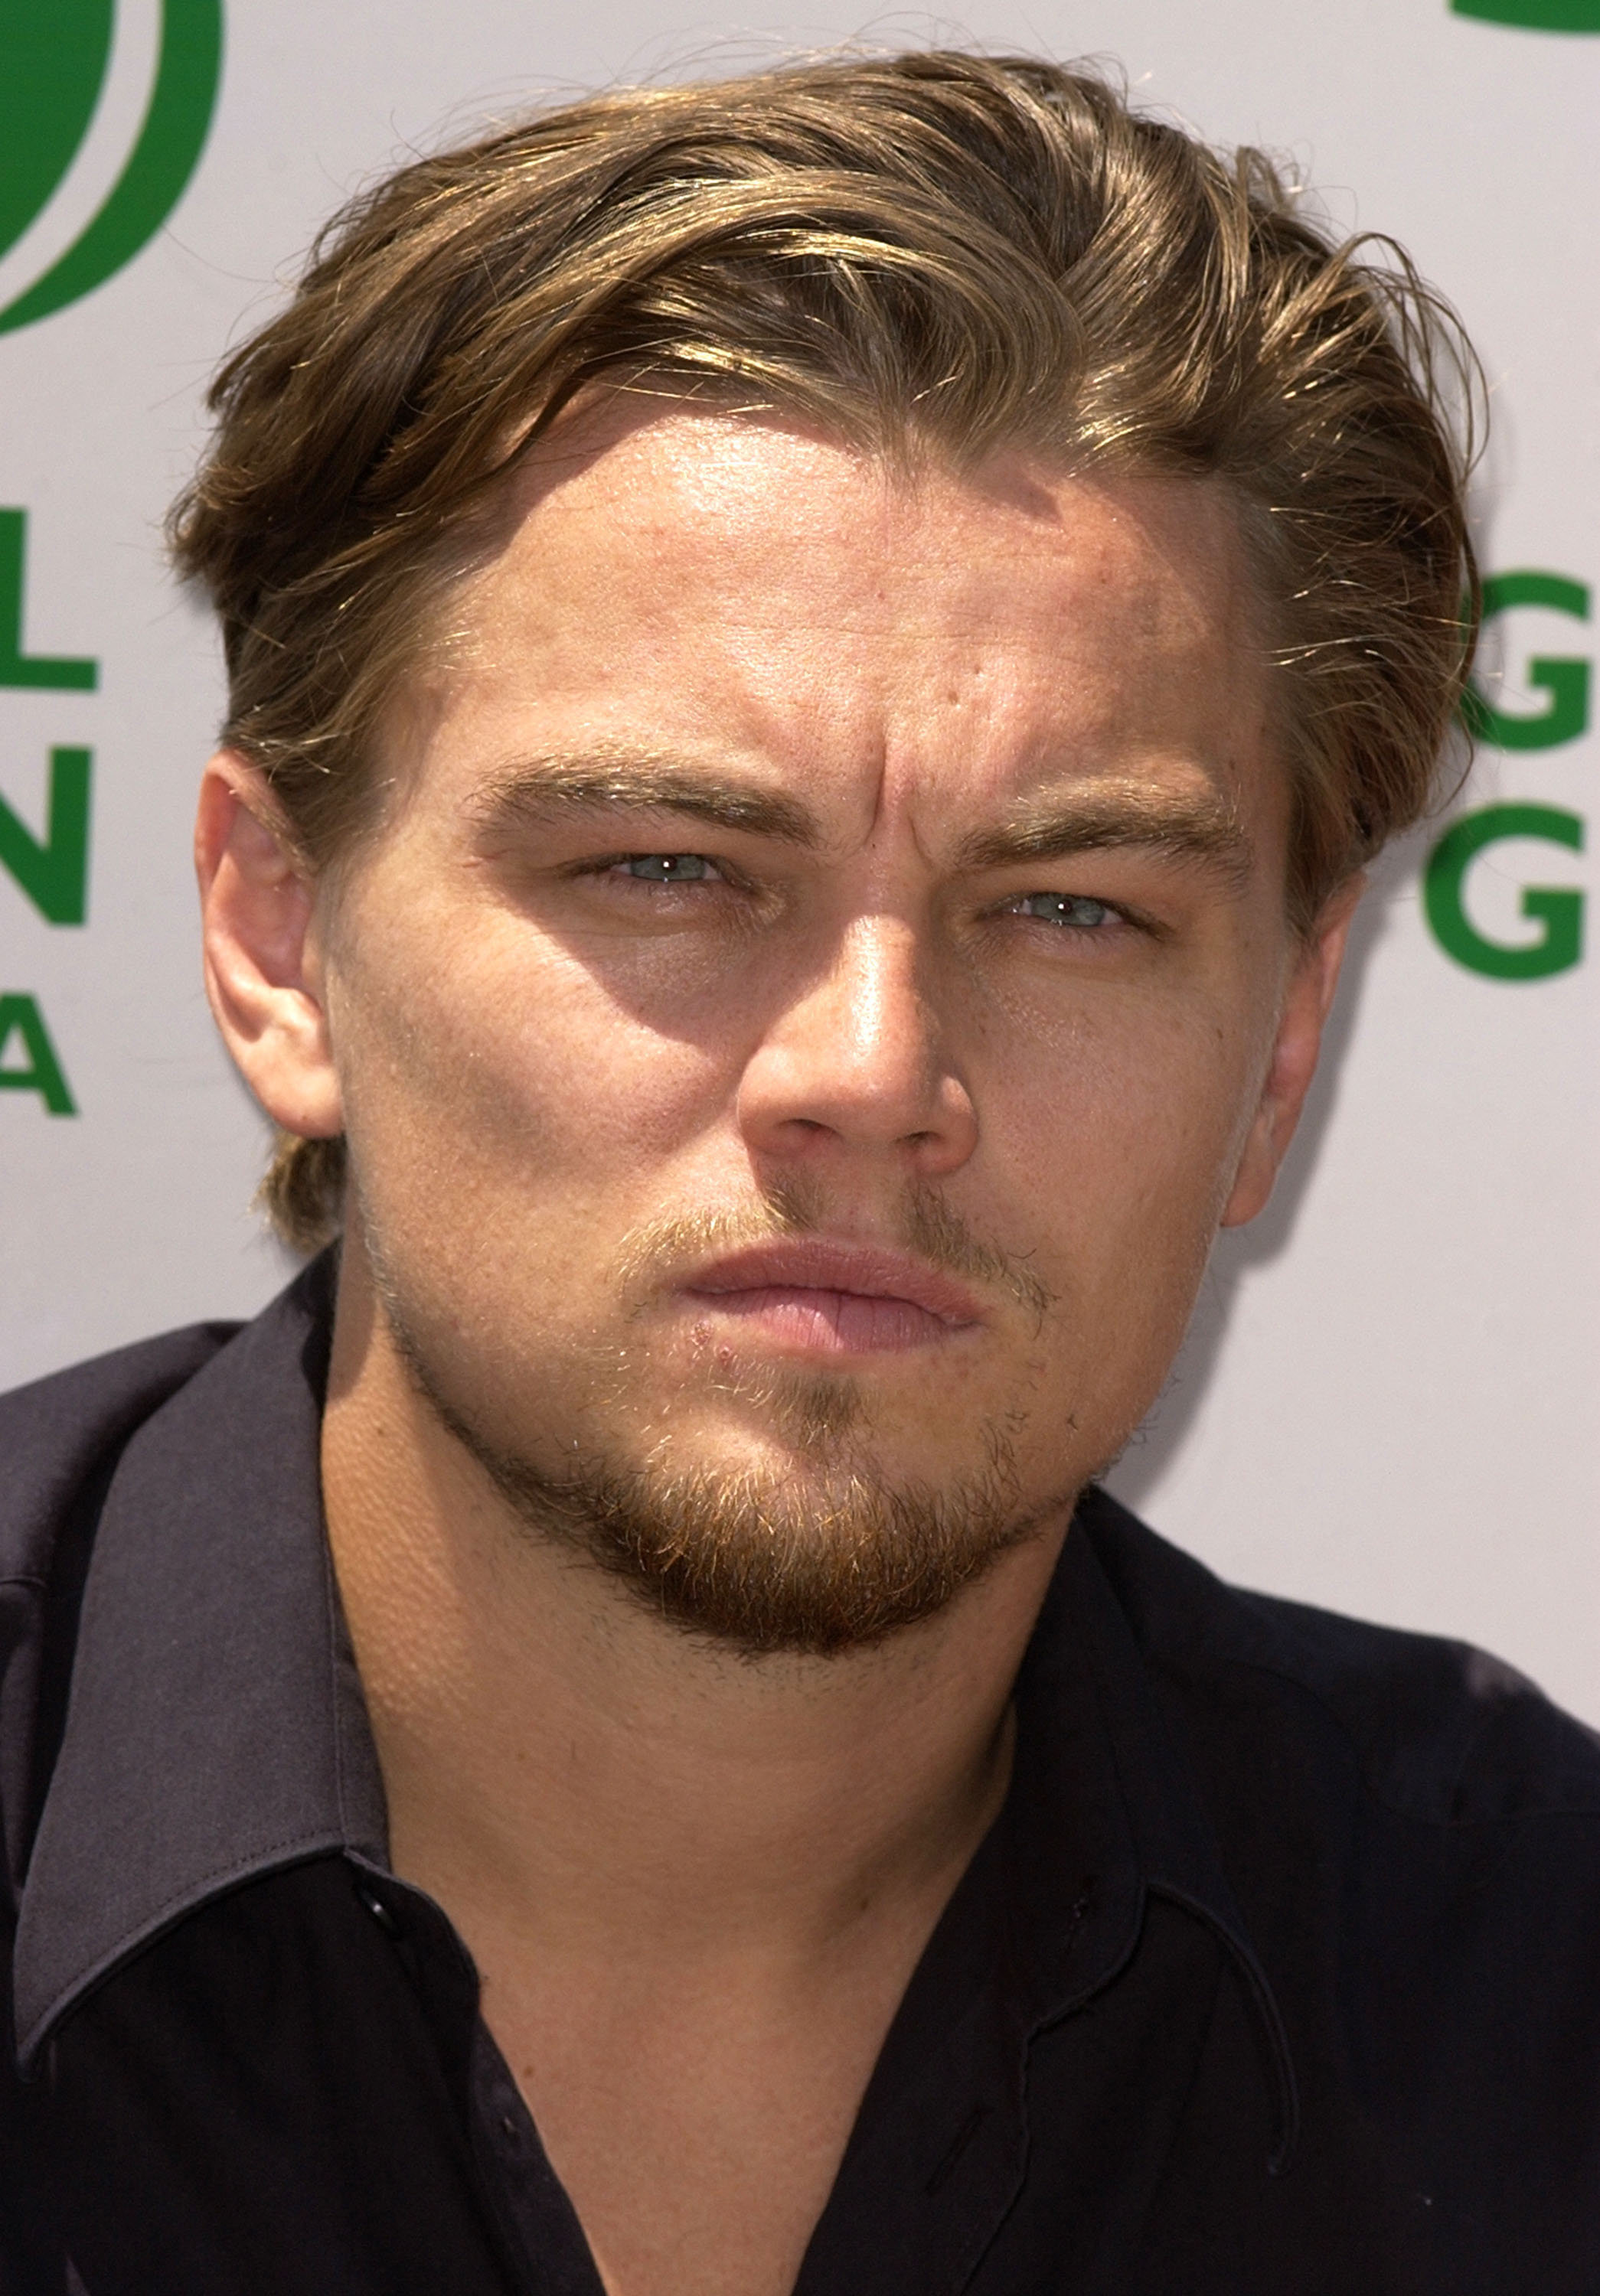 Leonardo Dicaprio Hairstyles: From WORST To BEST | Mens Hair Tips - YouTube